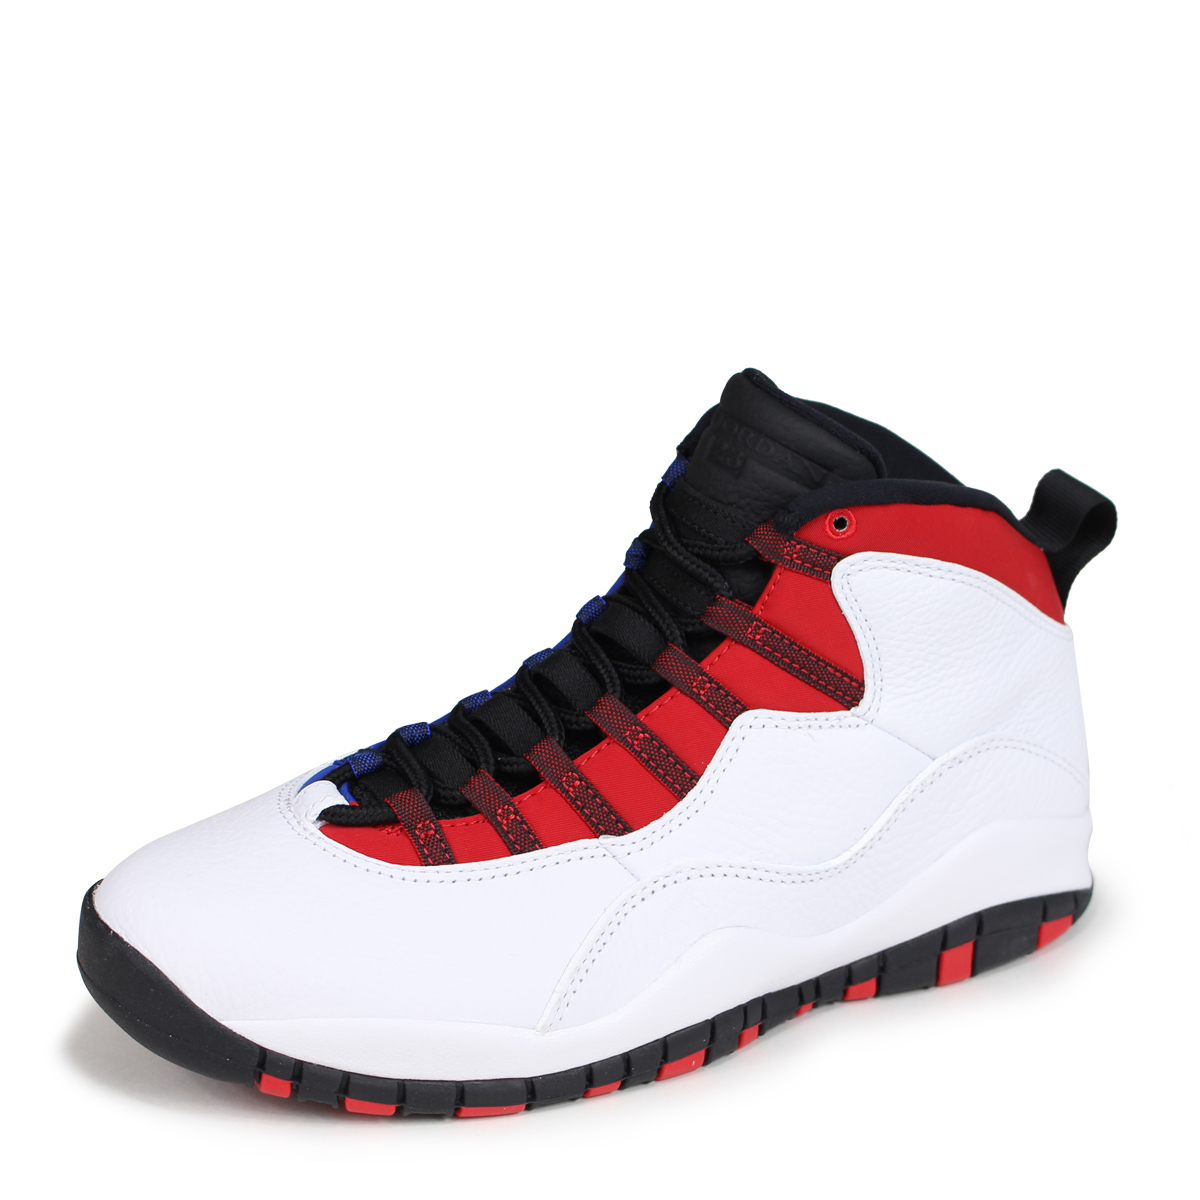 jordan 10 white and red